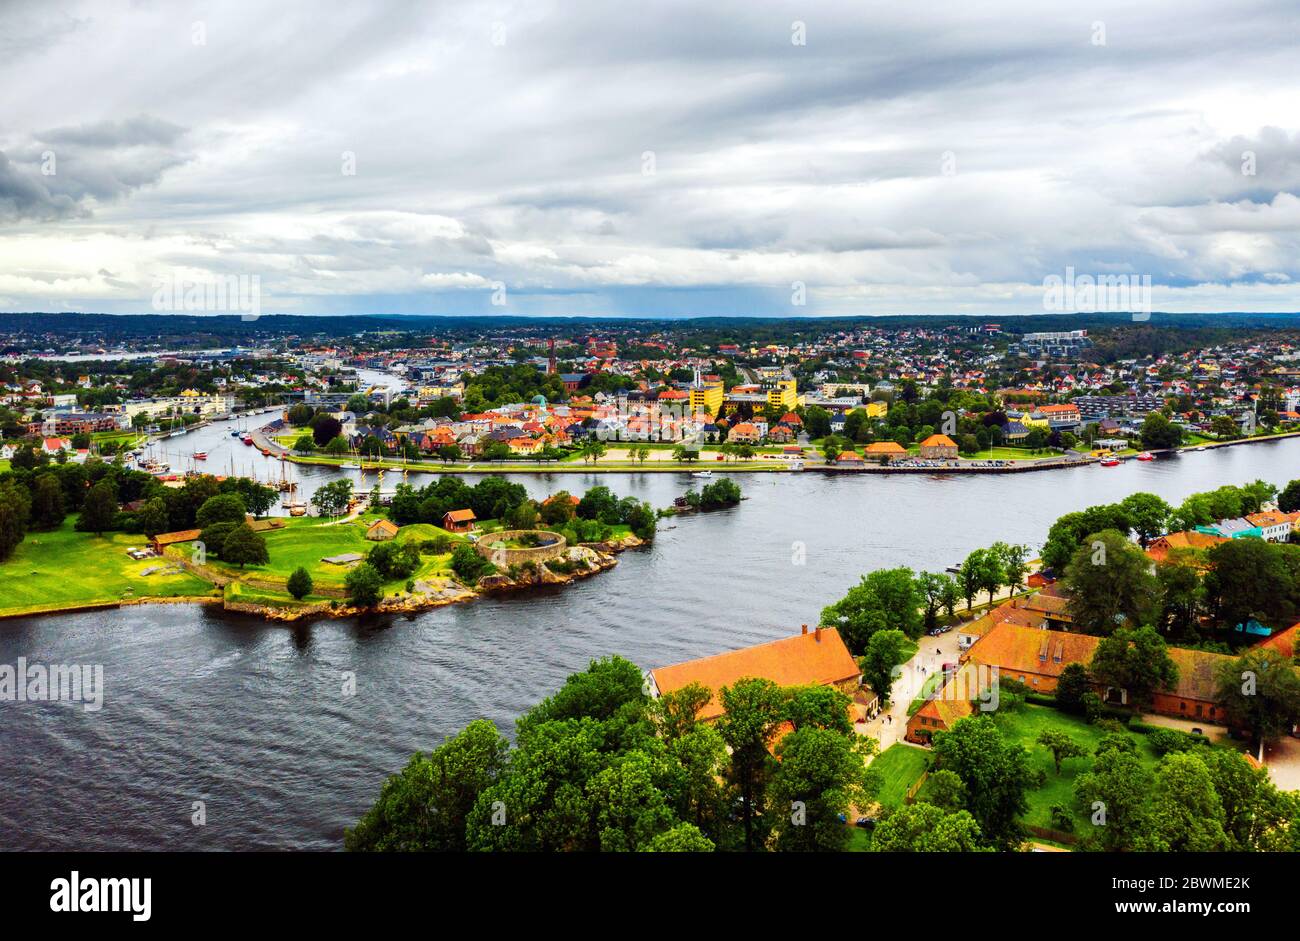 Fredrikstad, Norway. Aerial view of Glomma river in Fredrikstad, Norway with famous landmarks like Isegran Fort Stock Photo